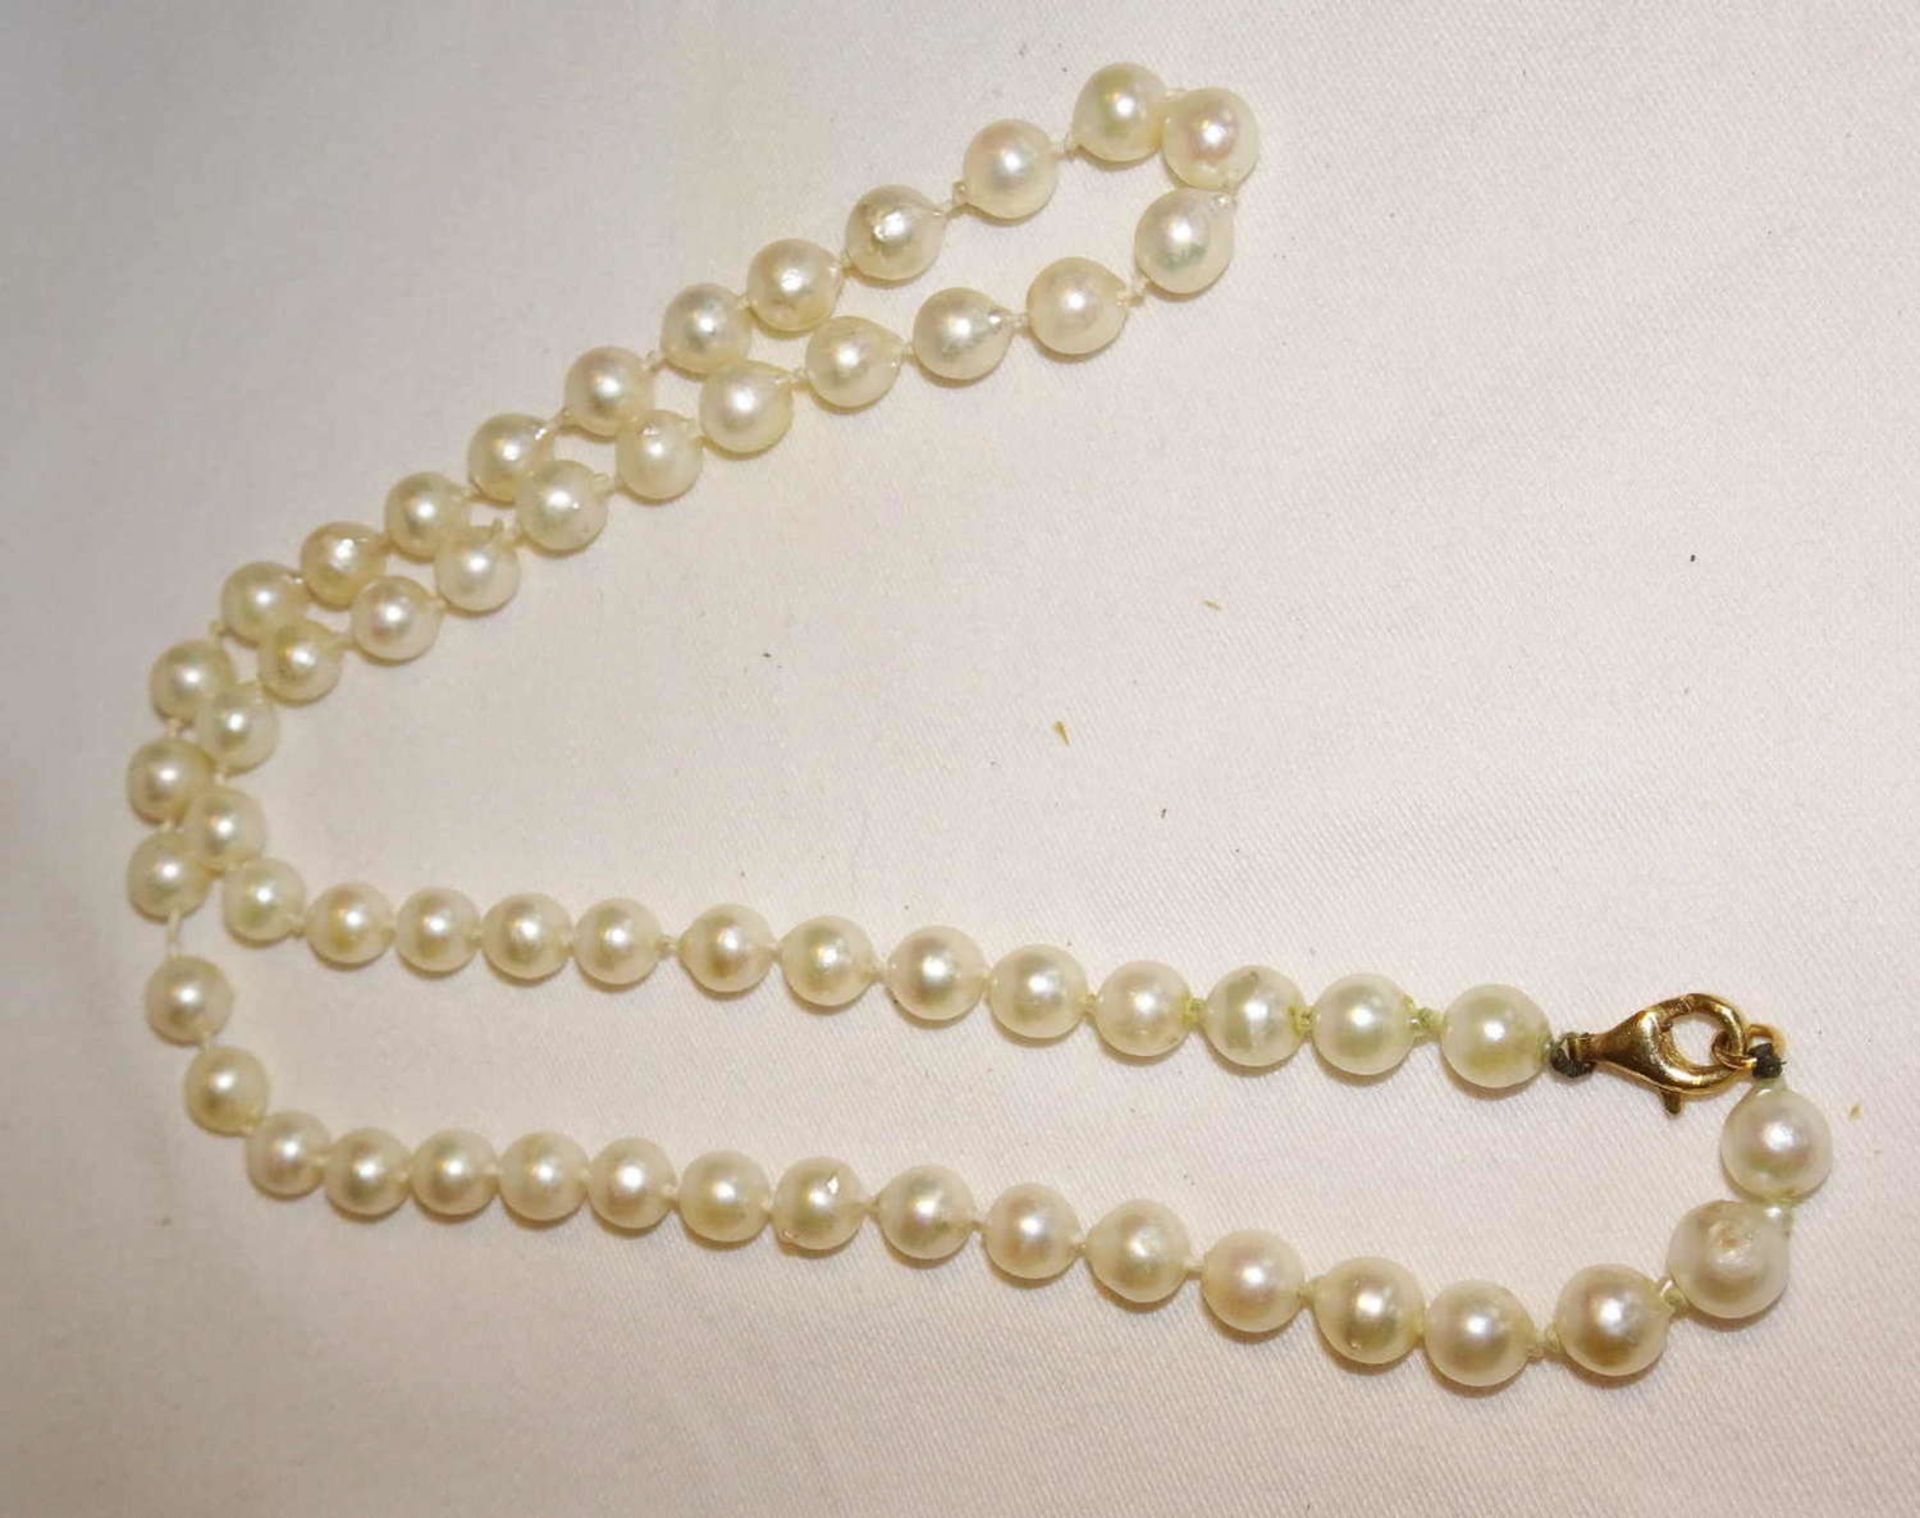 Real pearl necklace with 585 yellow gold clasp. Chain length approx. 49 cm